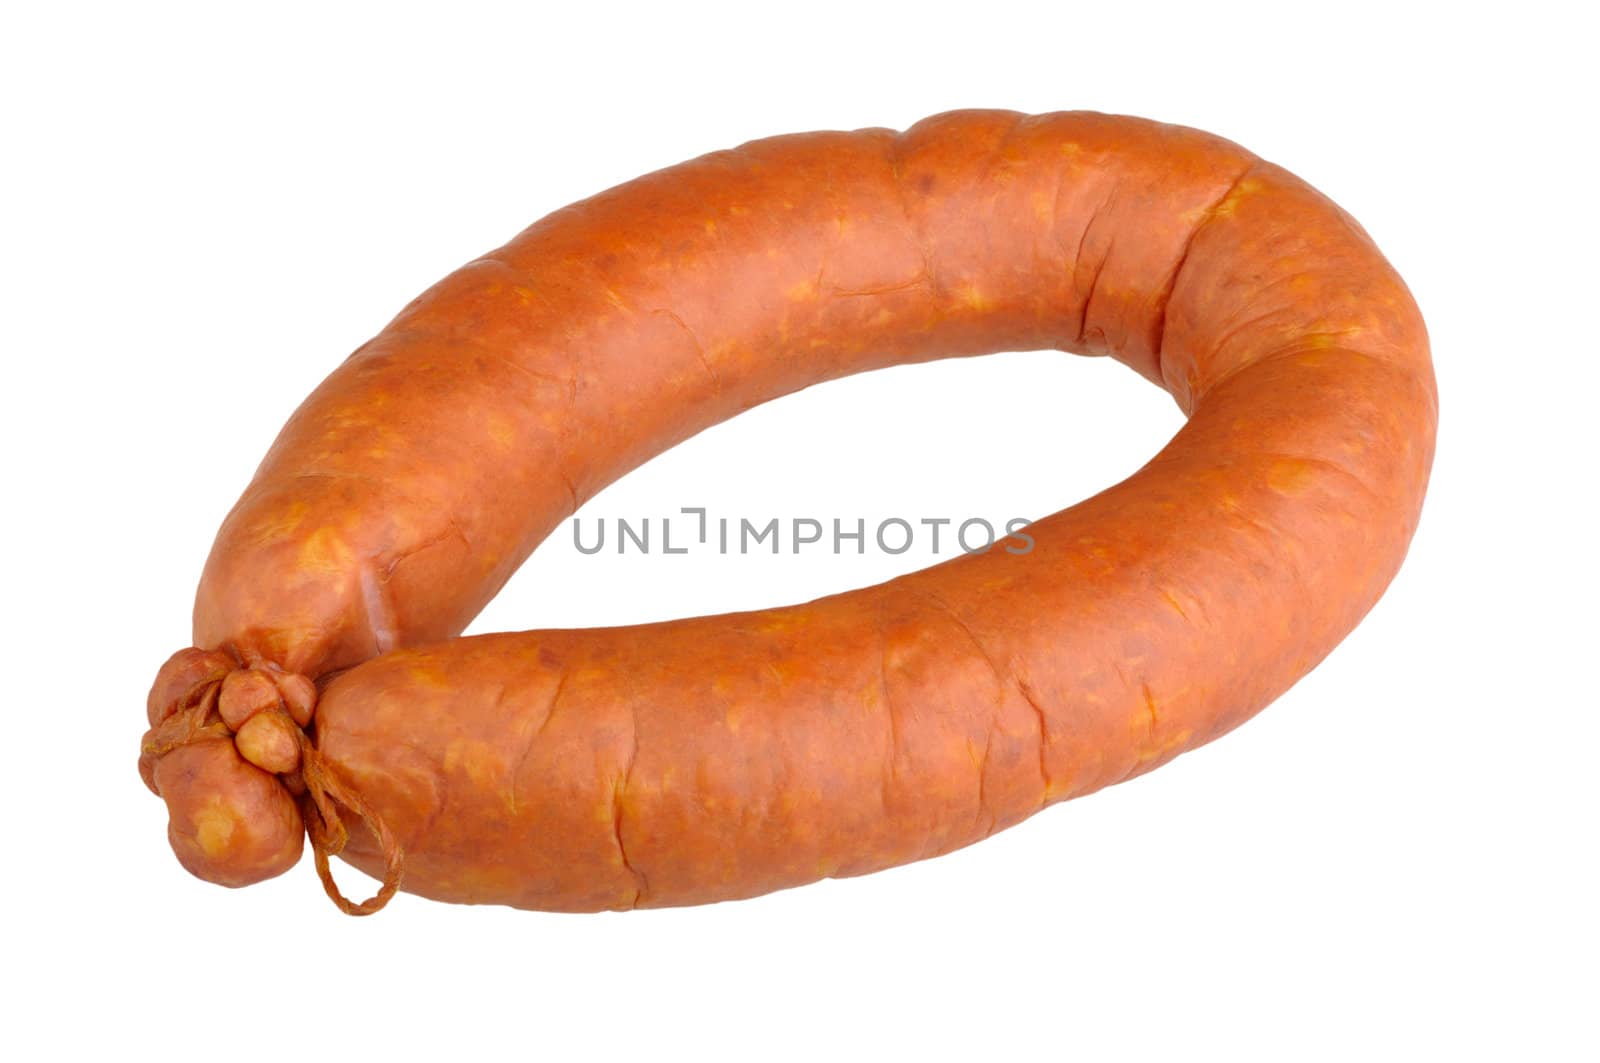 smoked sausage in natural casing isolated on white background